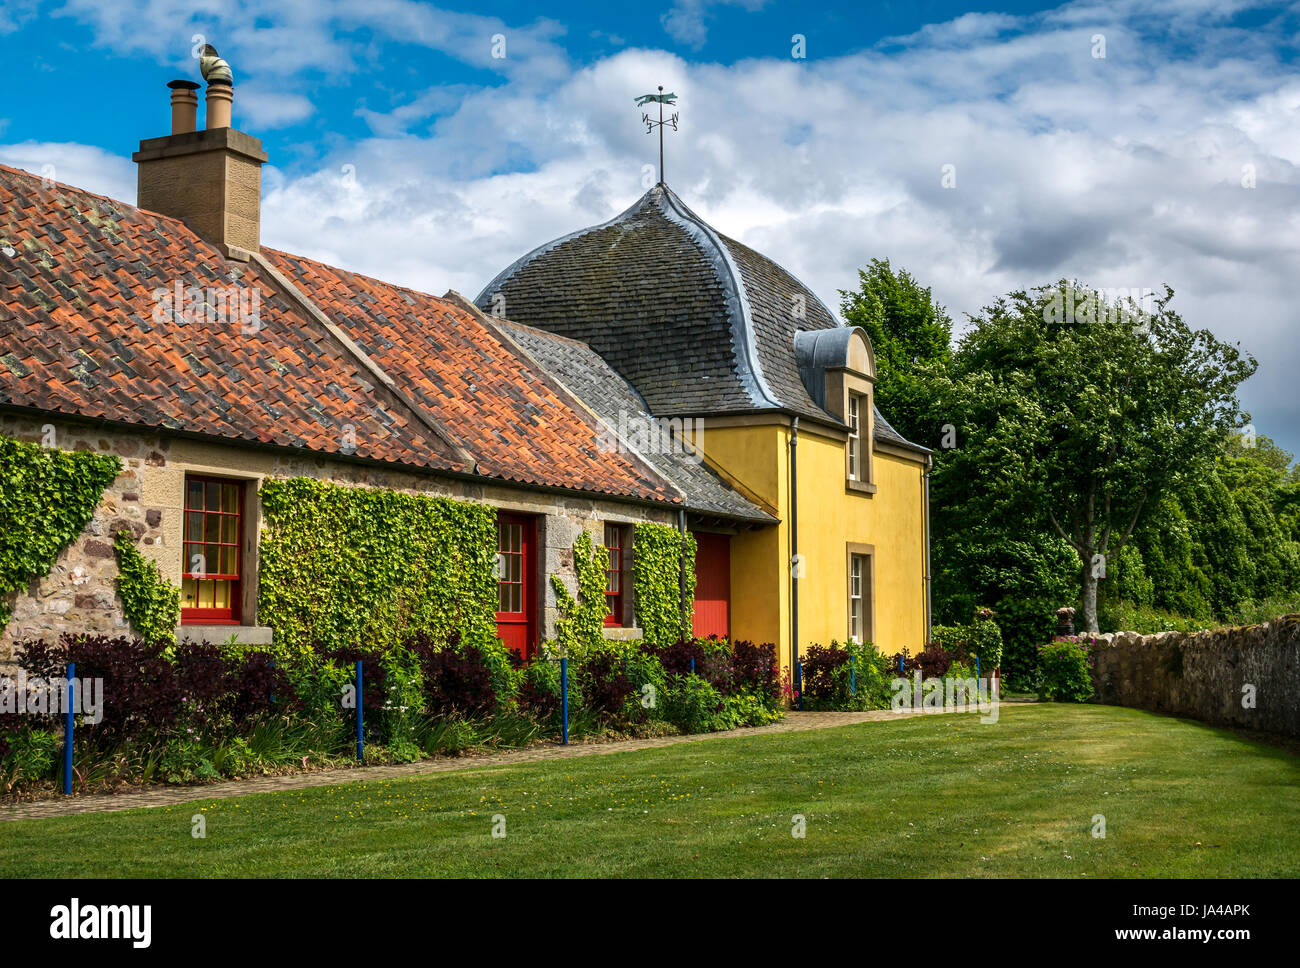 Colourful picturesque Steading farm building renovation to cottages at Broadwoodside, Gifford, East Lothian, Scotland, UK, in Summer Stock Photo